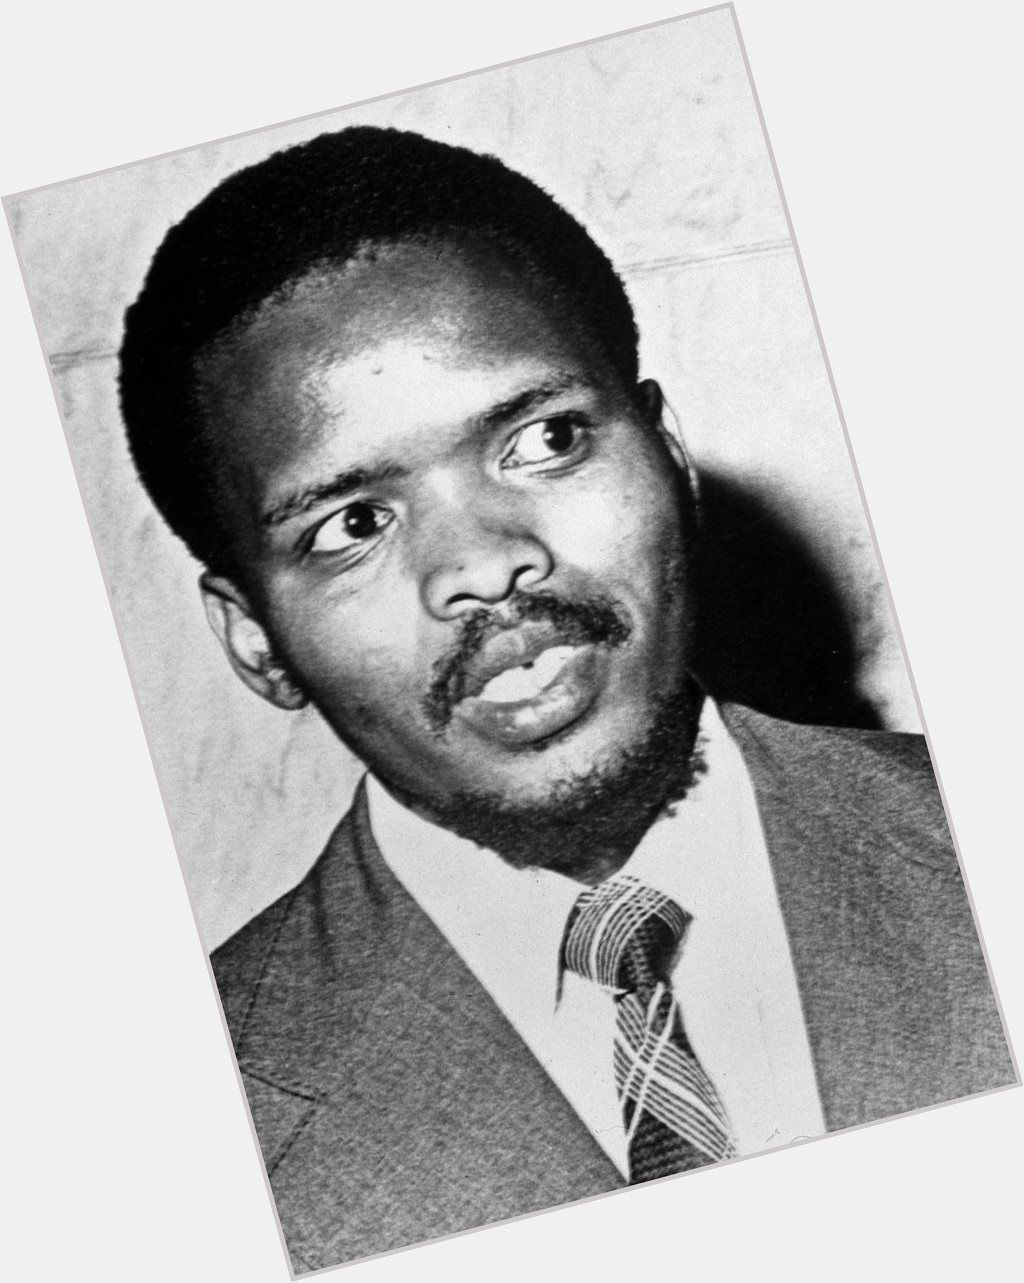 A happy birthday to the one and only Bantu Steve Biko. 